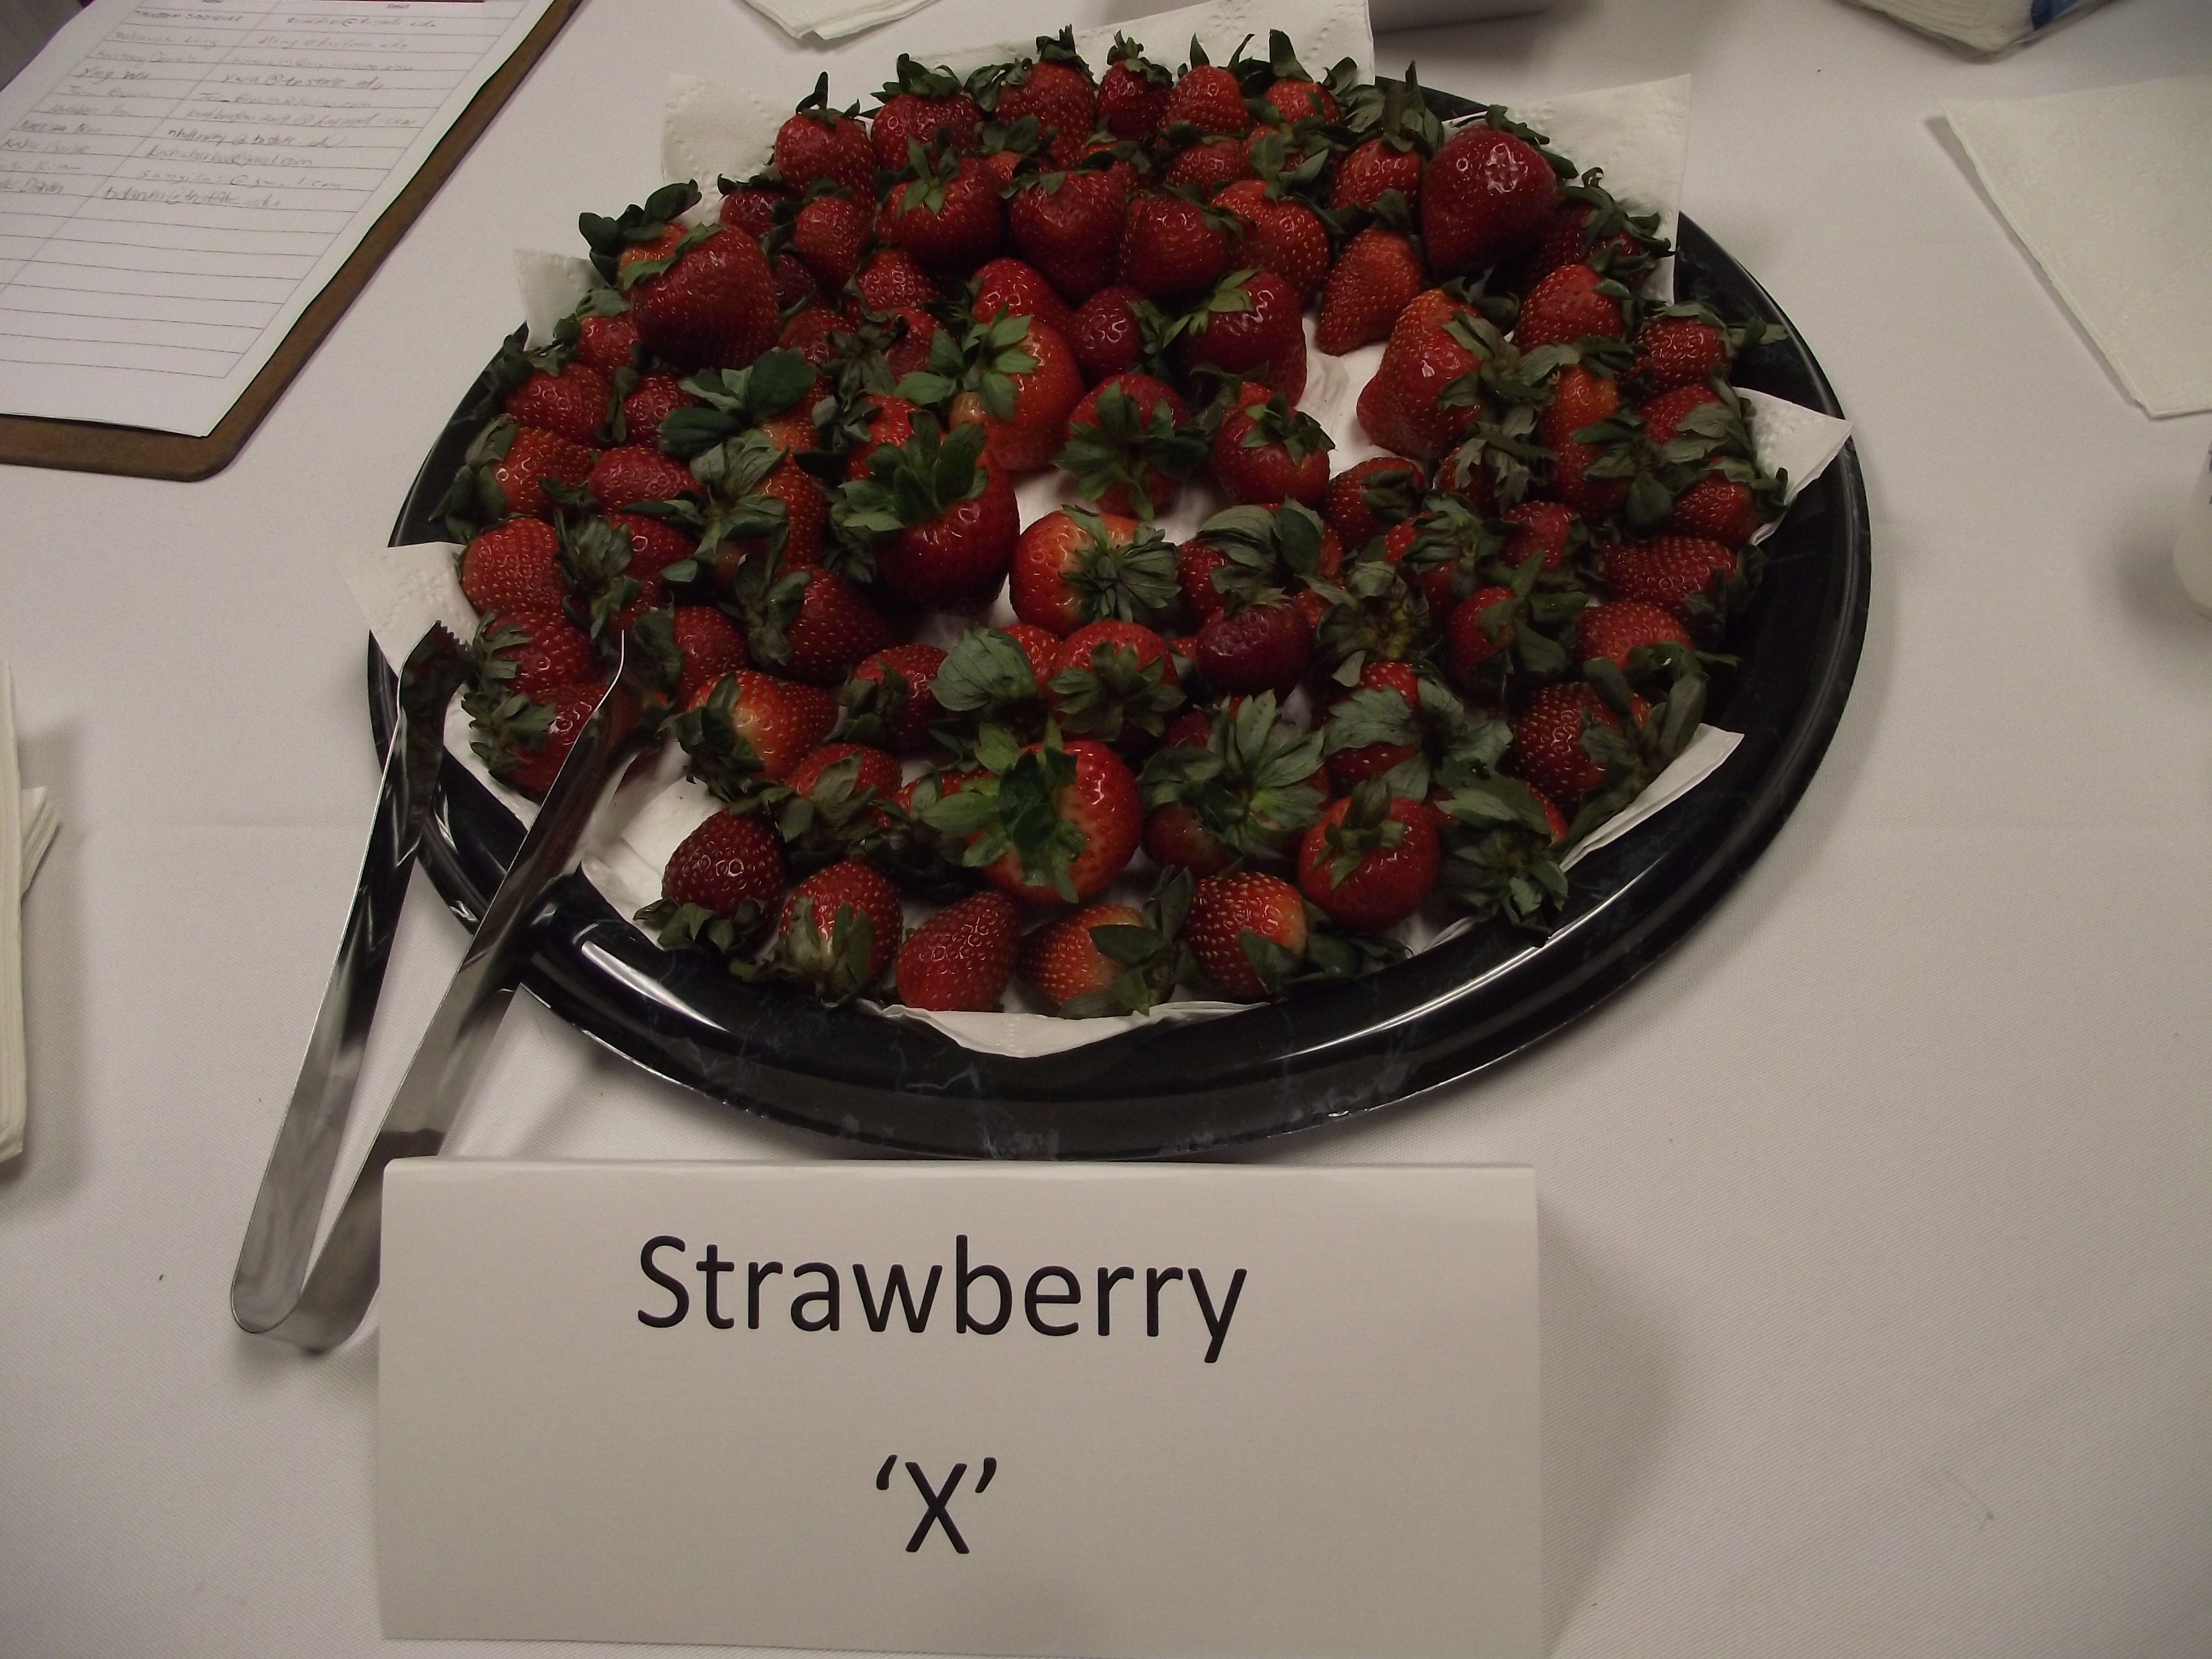 Strawberry X - Grocery Store Bought